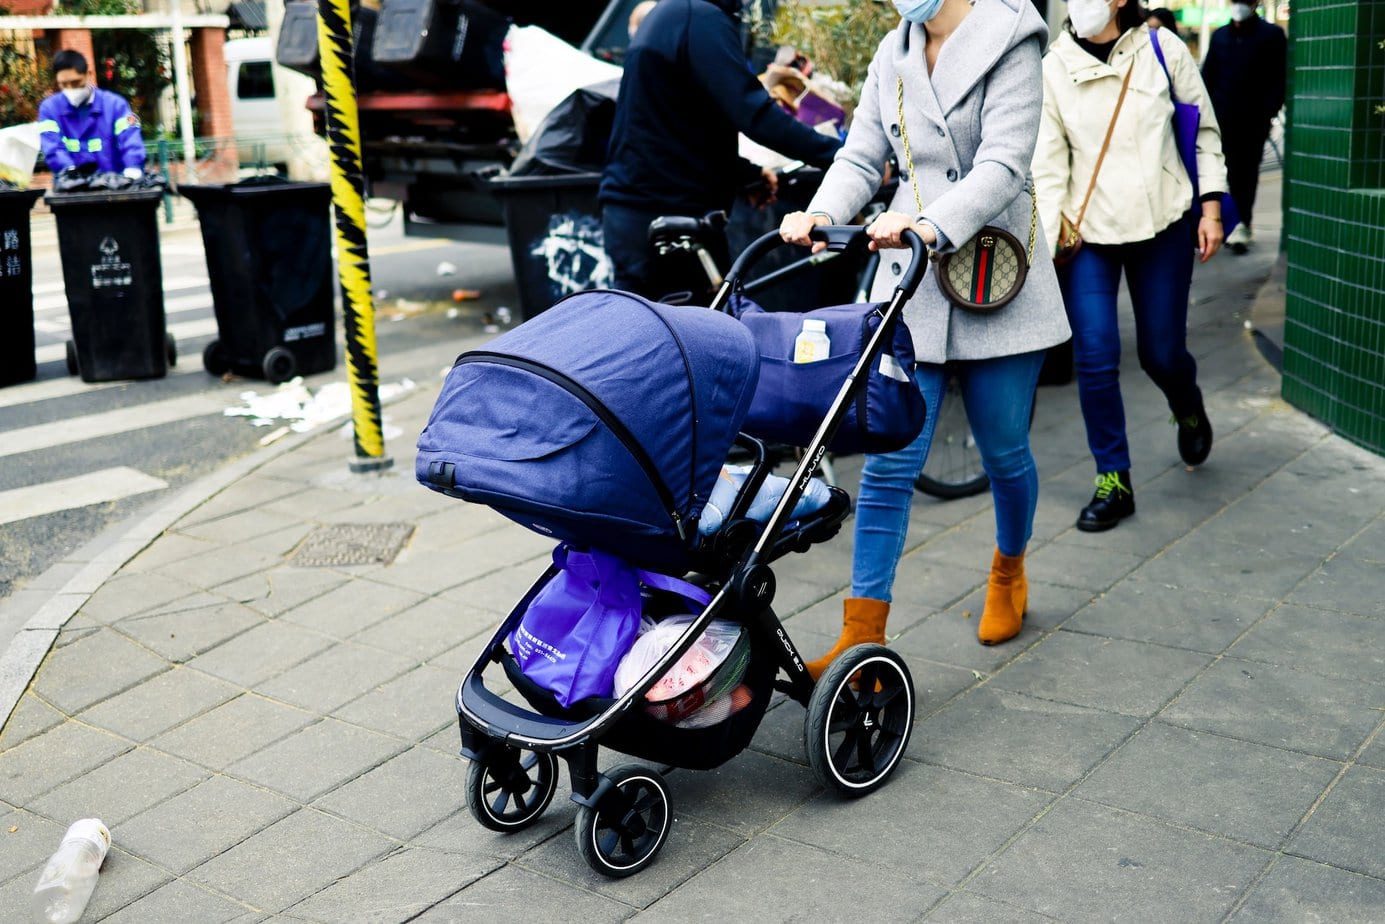 Strollers: The Best Way to Keep Your Newborn Safe and Comfortable